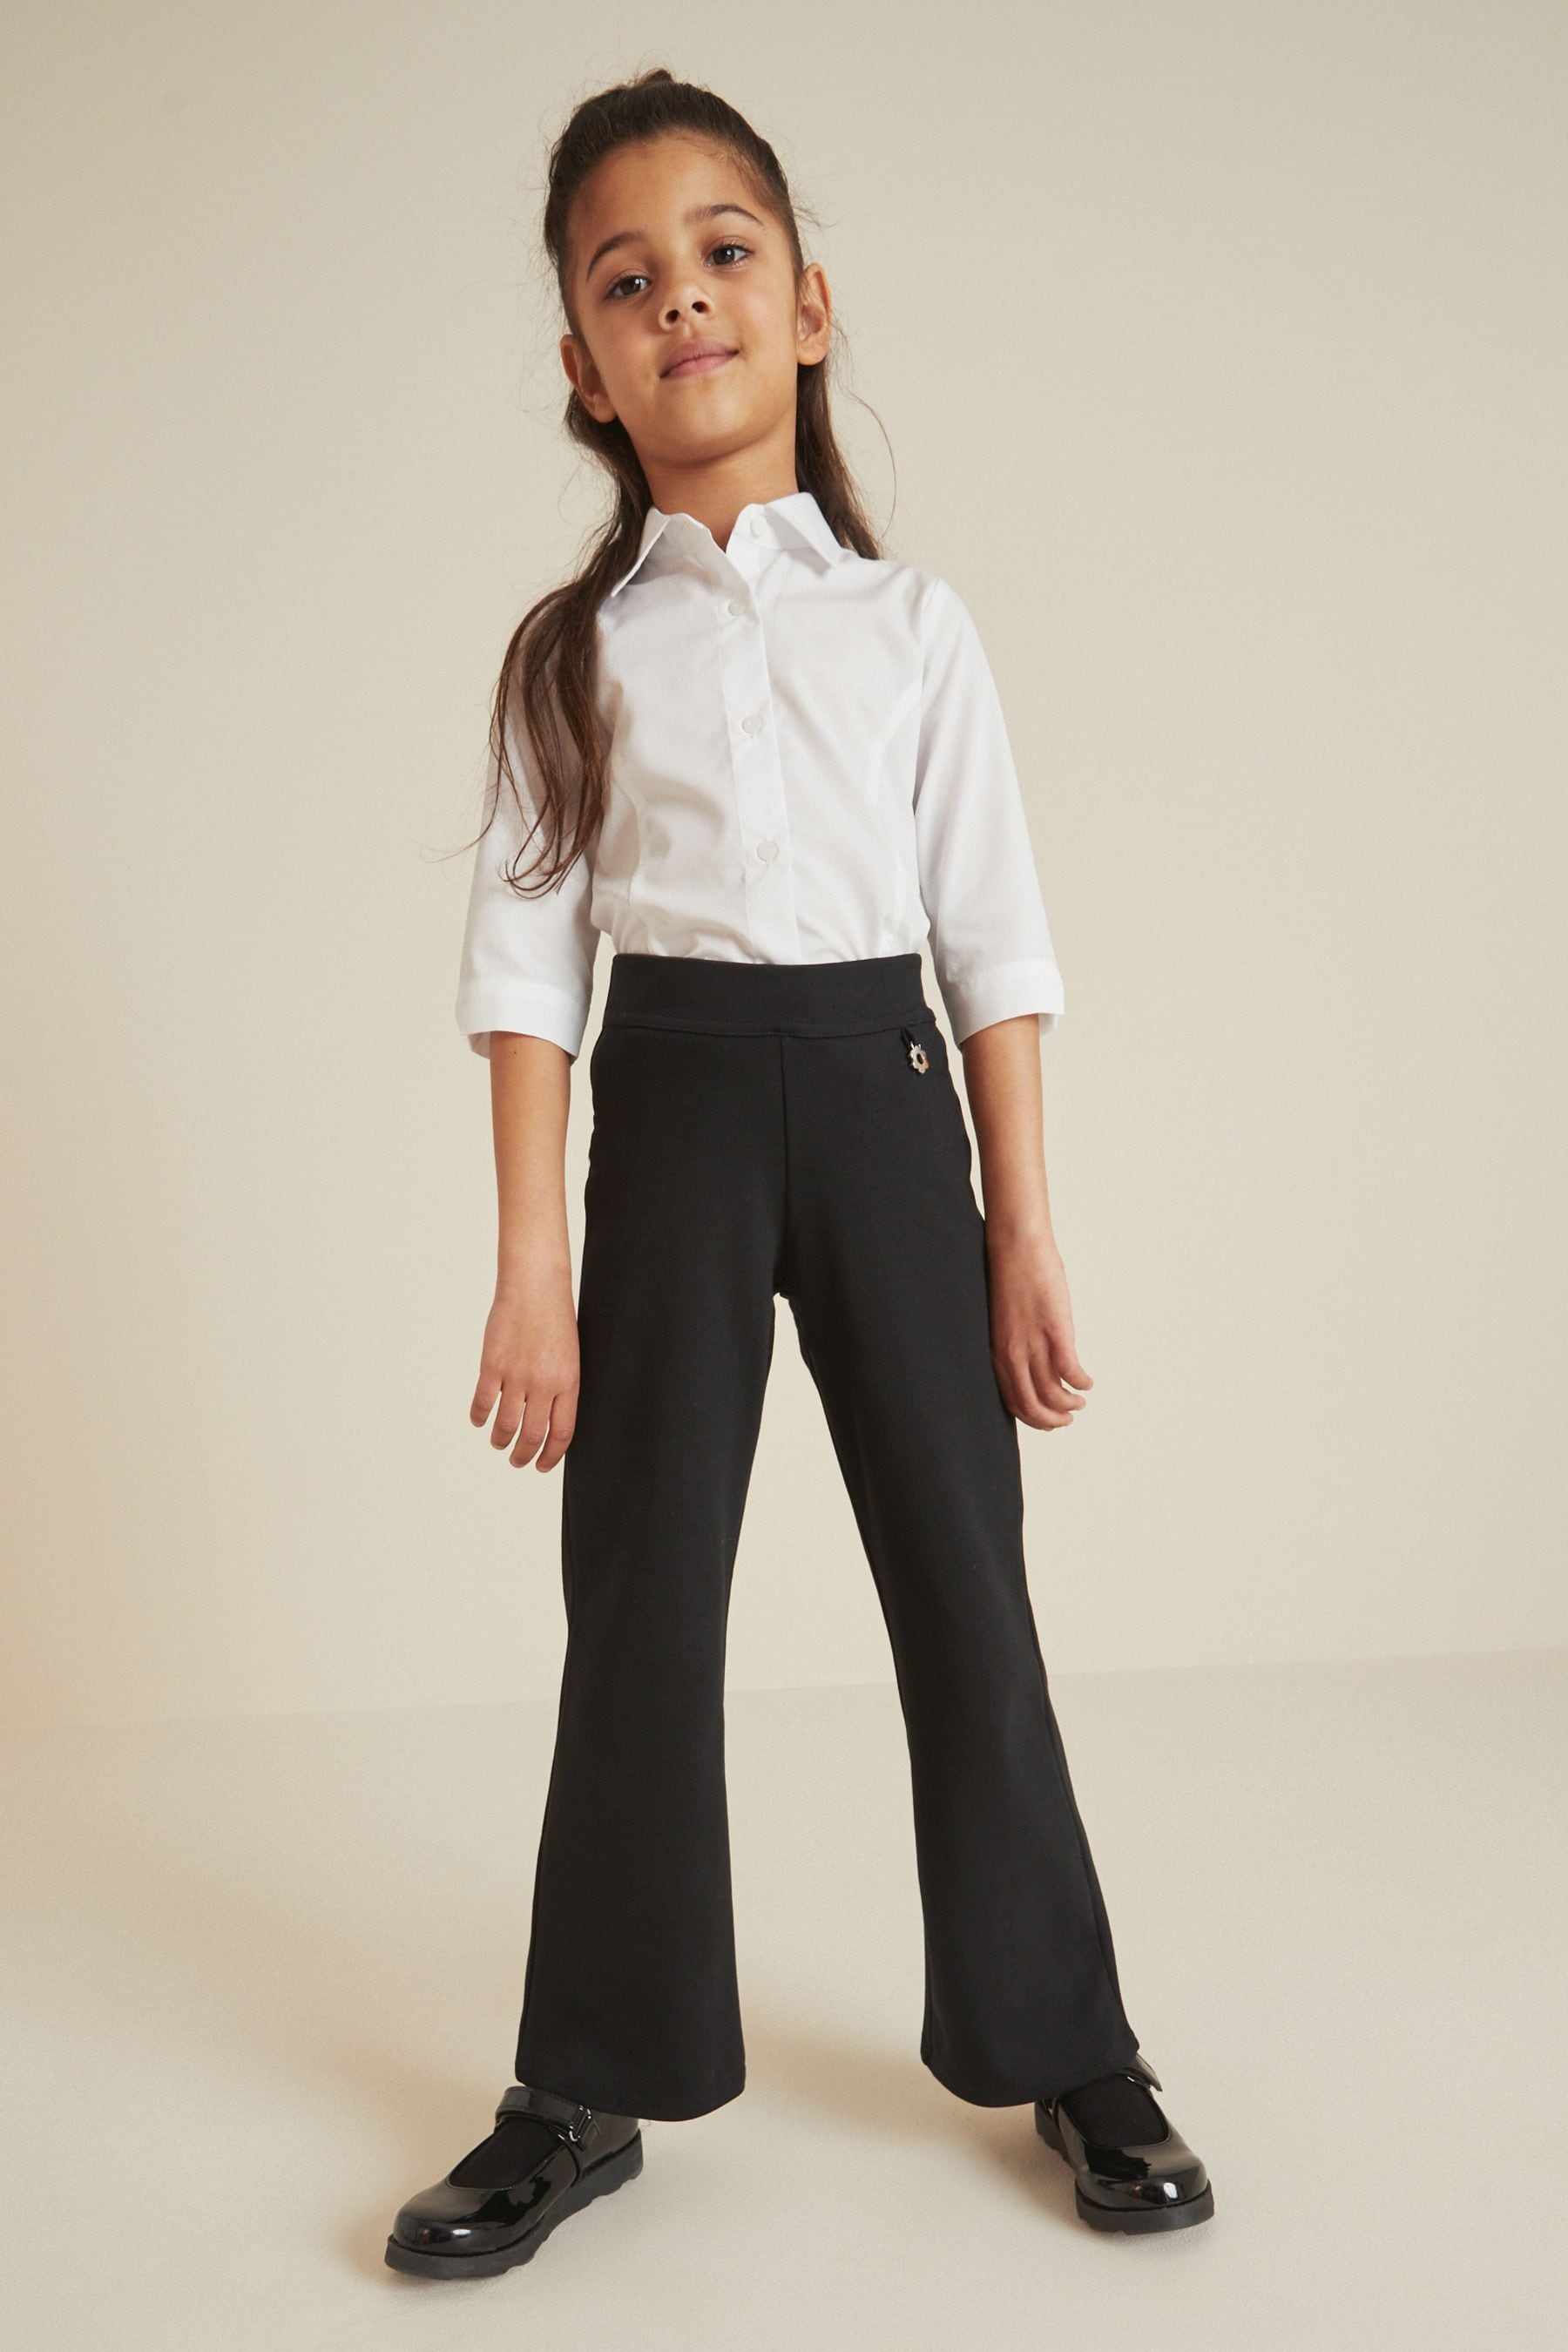 Buy Cotton Rich Jersey Stretch PullOn Frill Detail School Trousers  316yrs from the Next UK online shop